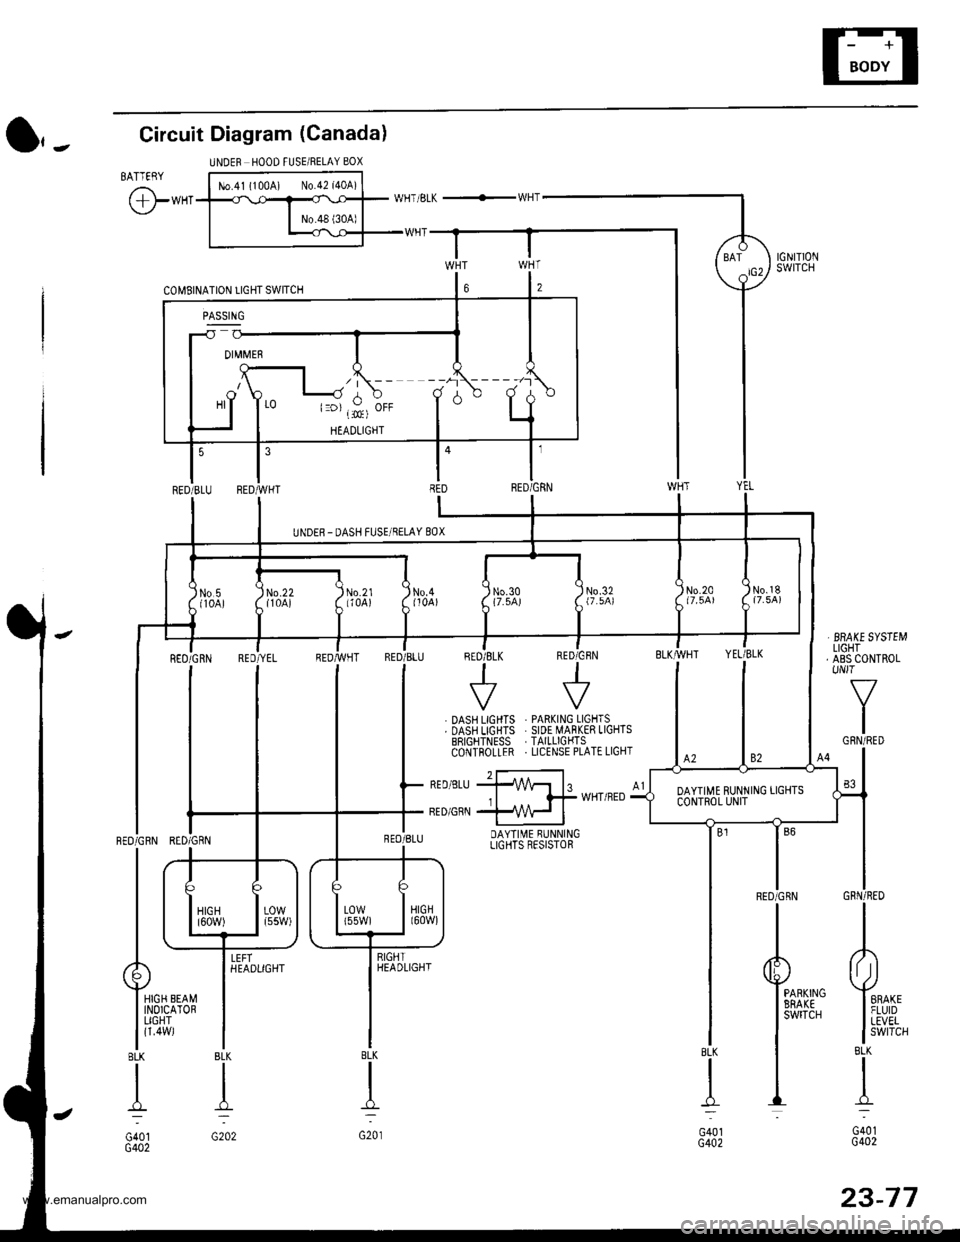 HONDA CR-V 1998 RD1-RD3 / 1.G Workshop Manual 
UNDER HOOD FUSEiRELAY 80X
WHT/BLK +WHT
c0t\48rNATroN UGHT SWITCH
4
RED
HIGH BEAMINOICATORLIGHT
l=o) , :., oFF
O,-Circuit Diagram (Canada)
BATTEBY
@*"
UNDER- DASH FUSE/RELAY 8OX
BBAXE SYSTEMLIGHTABS C